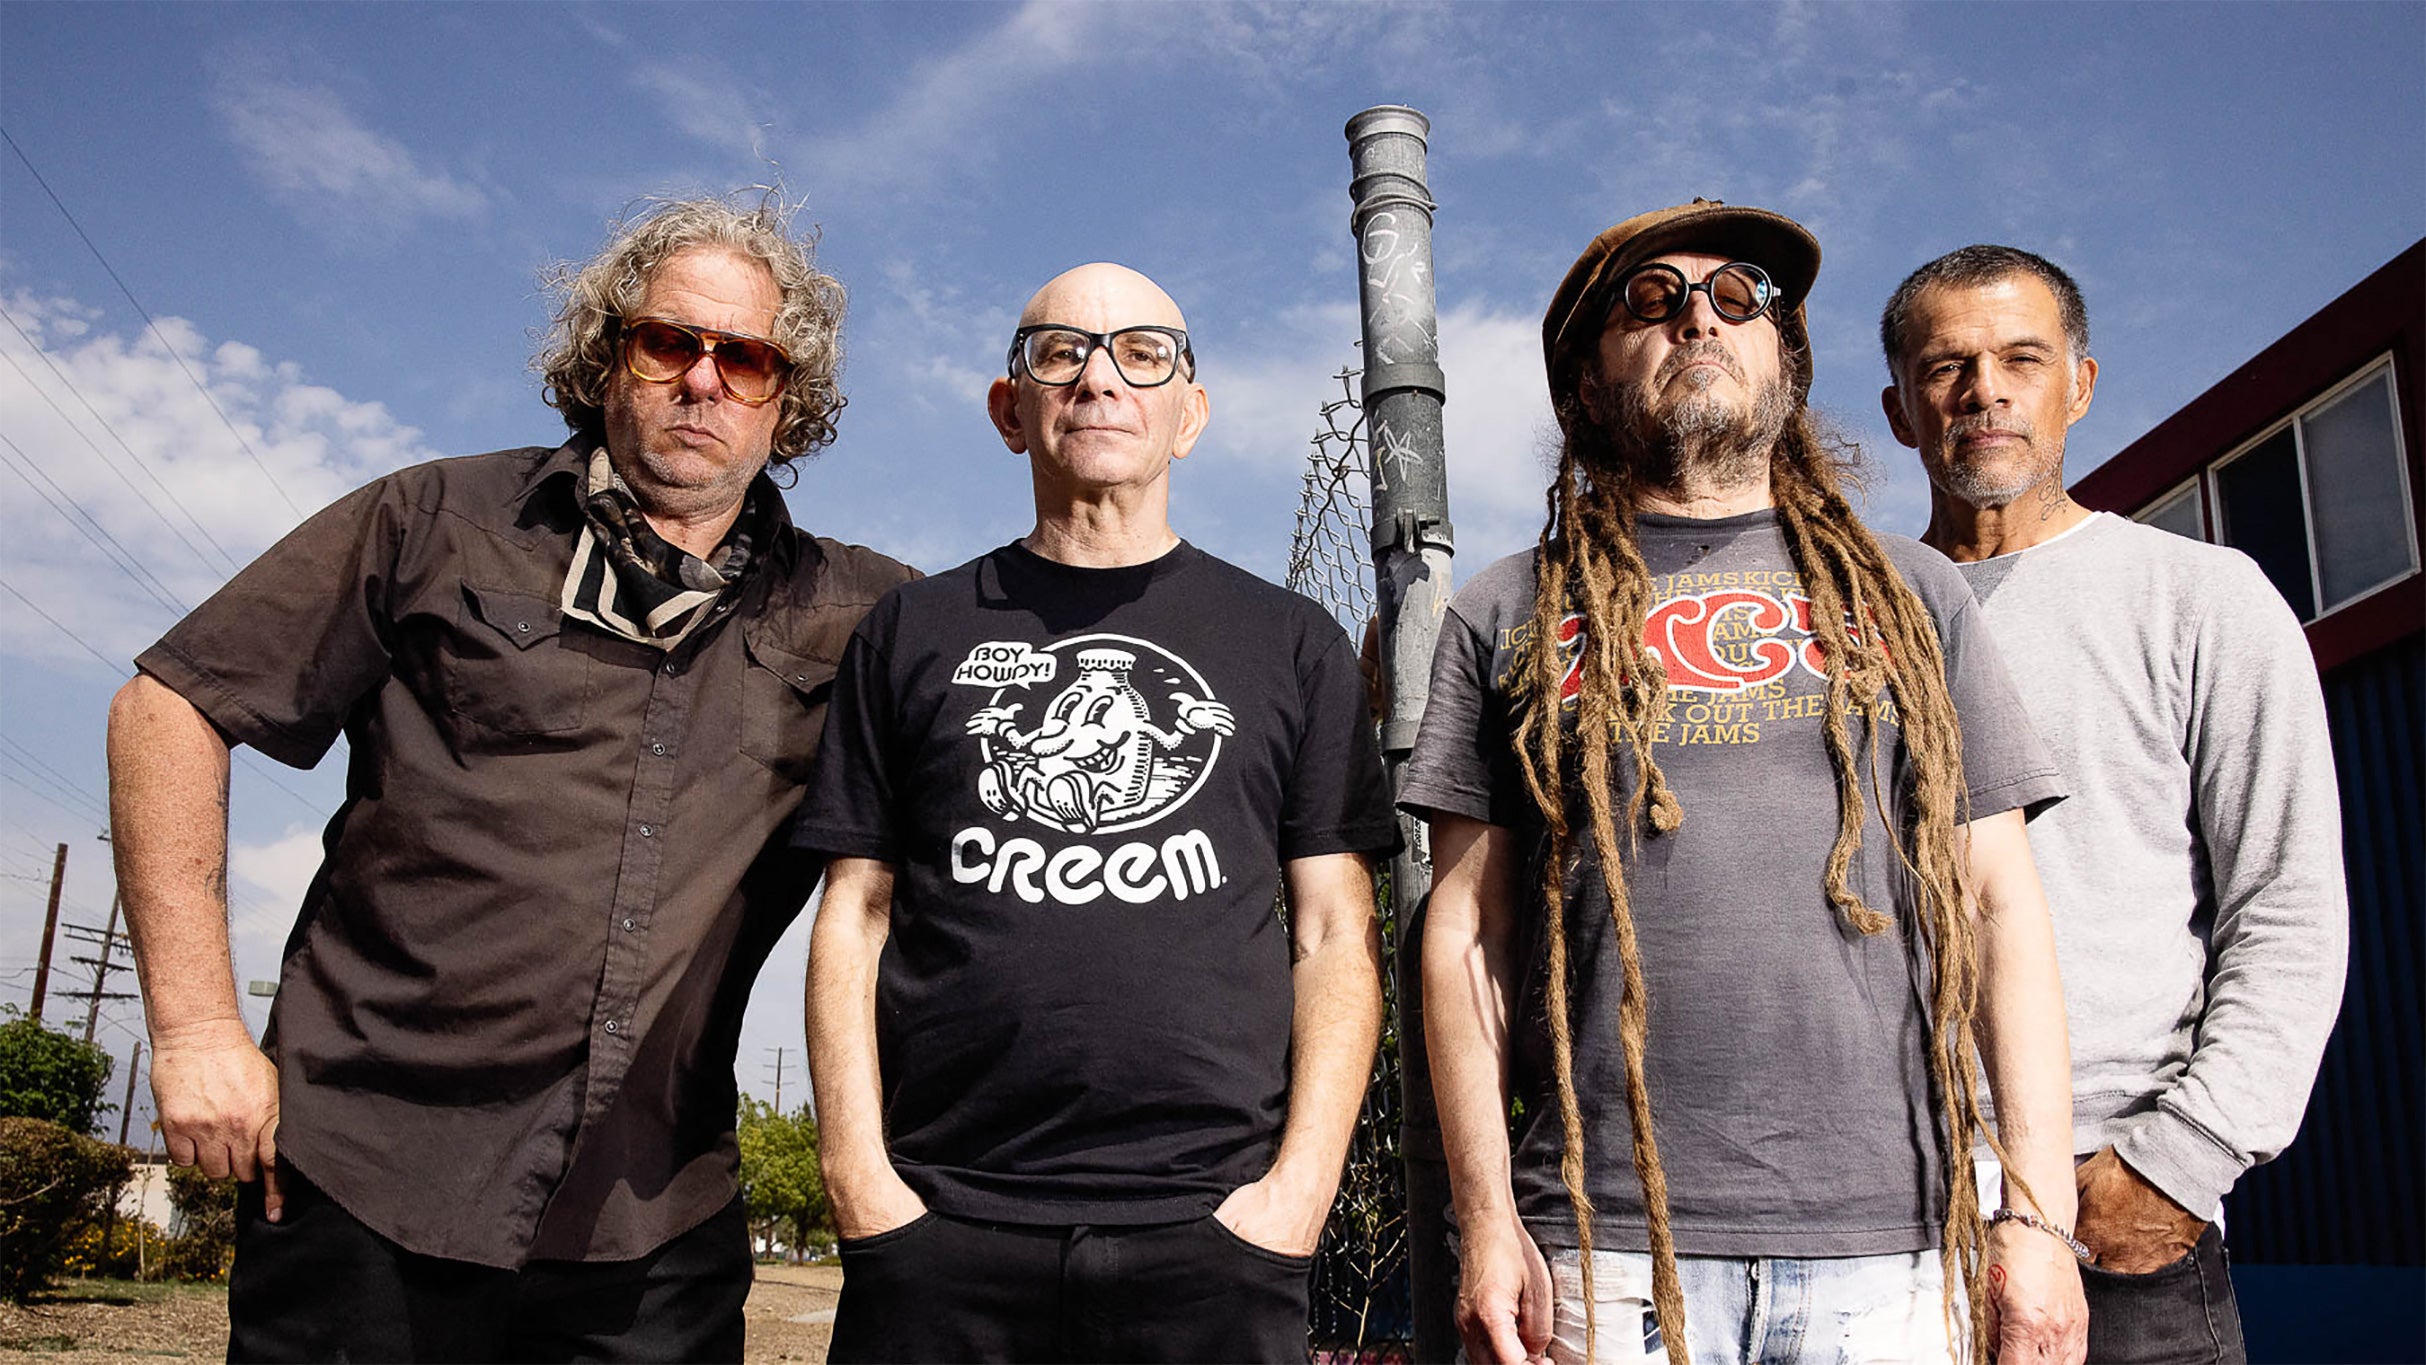 Circle Jerks and Descendents in New Orleans promo photo for Artist presale offer code